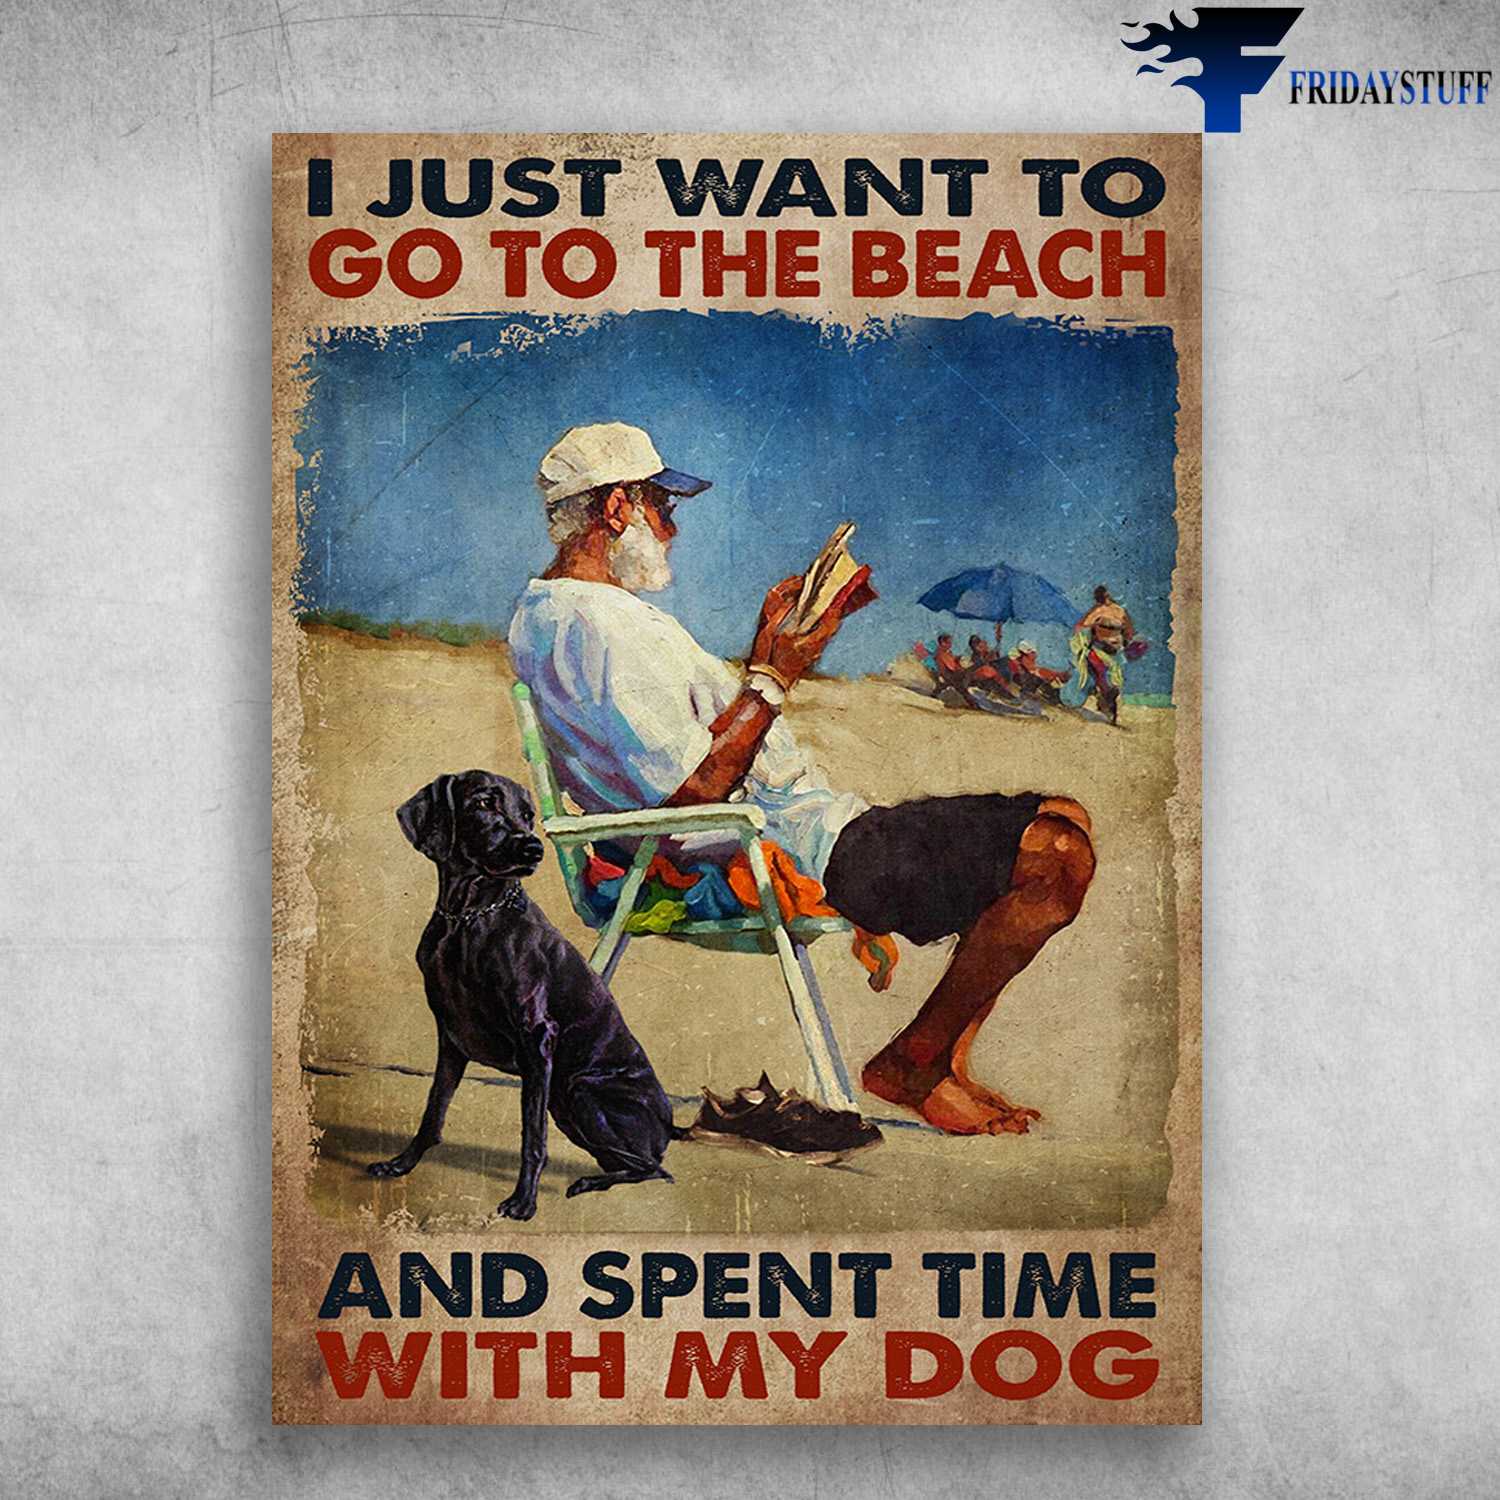 Beach With Dog - I Just Want To Go To The Beach, And Spent Time With My Dog, Reading Books